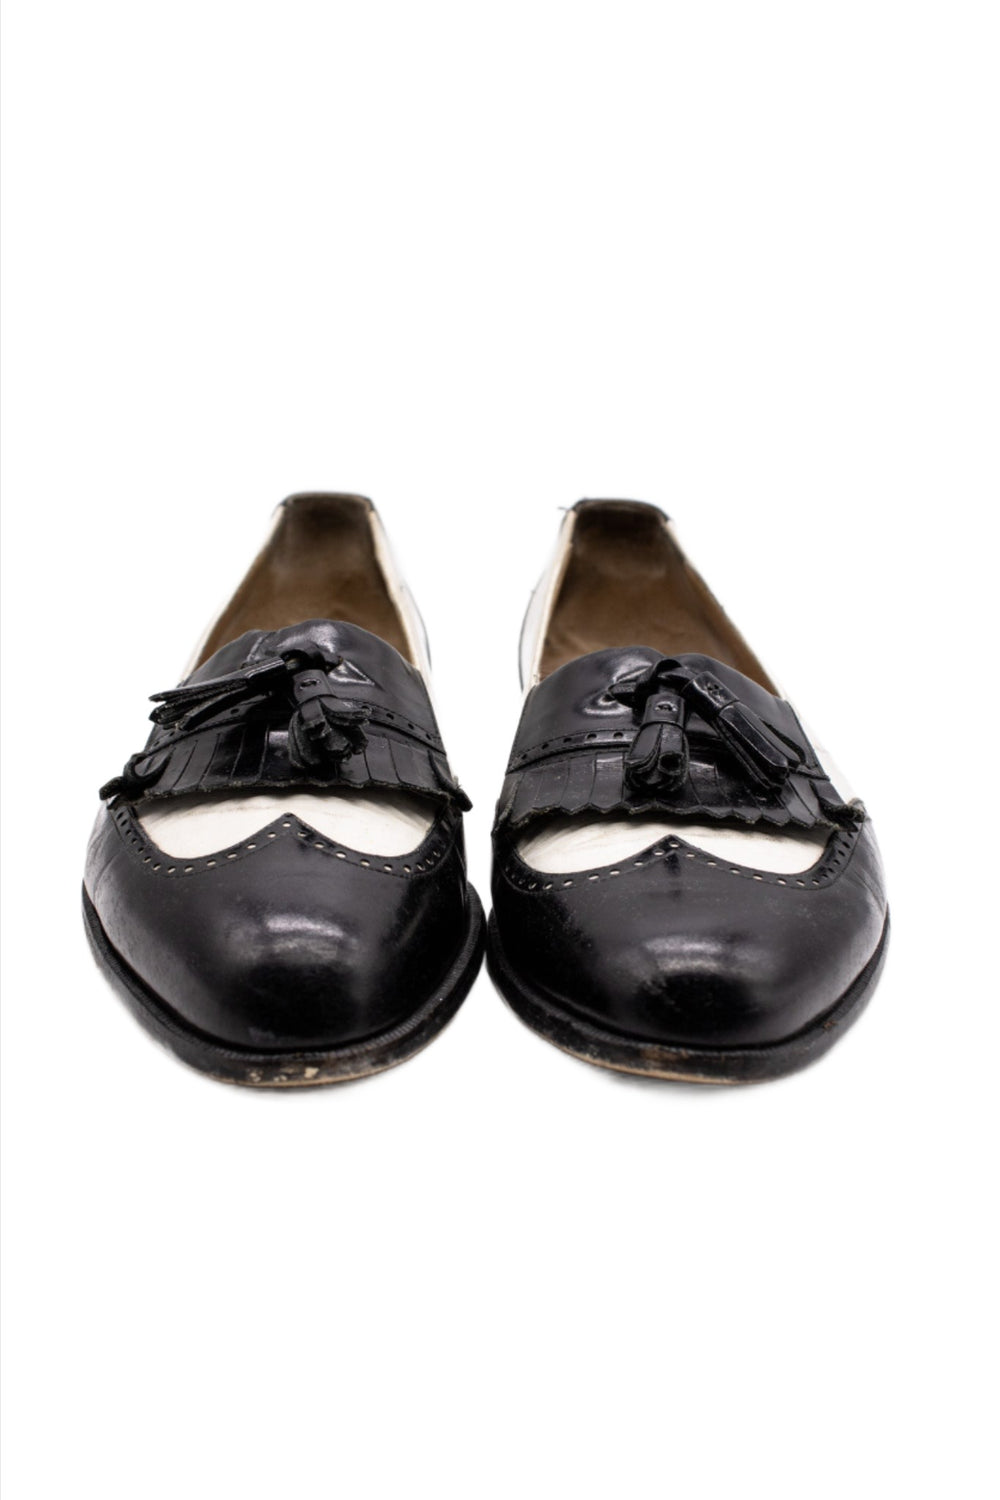 Bally : Black & White Leather Oxford Loafer w/ Tassels